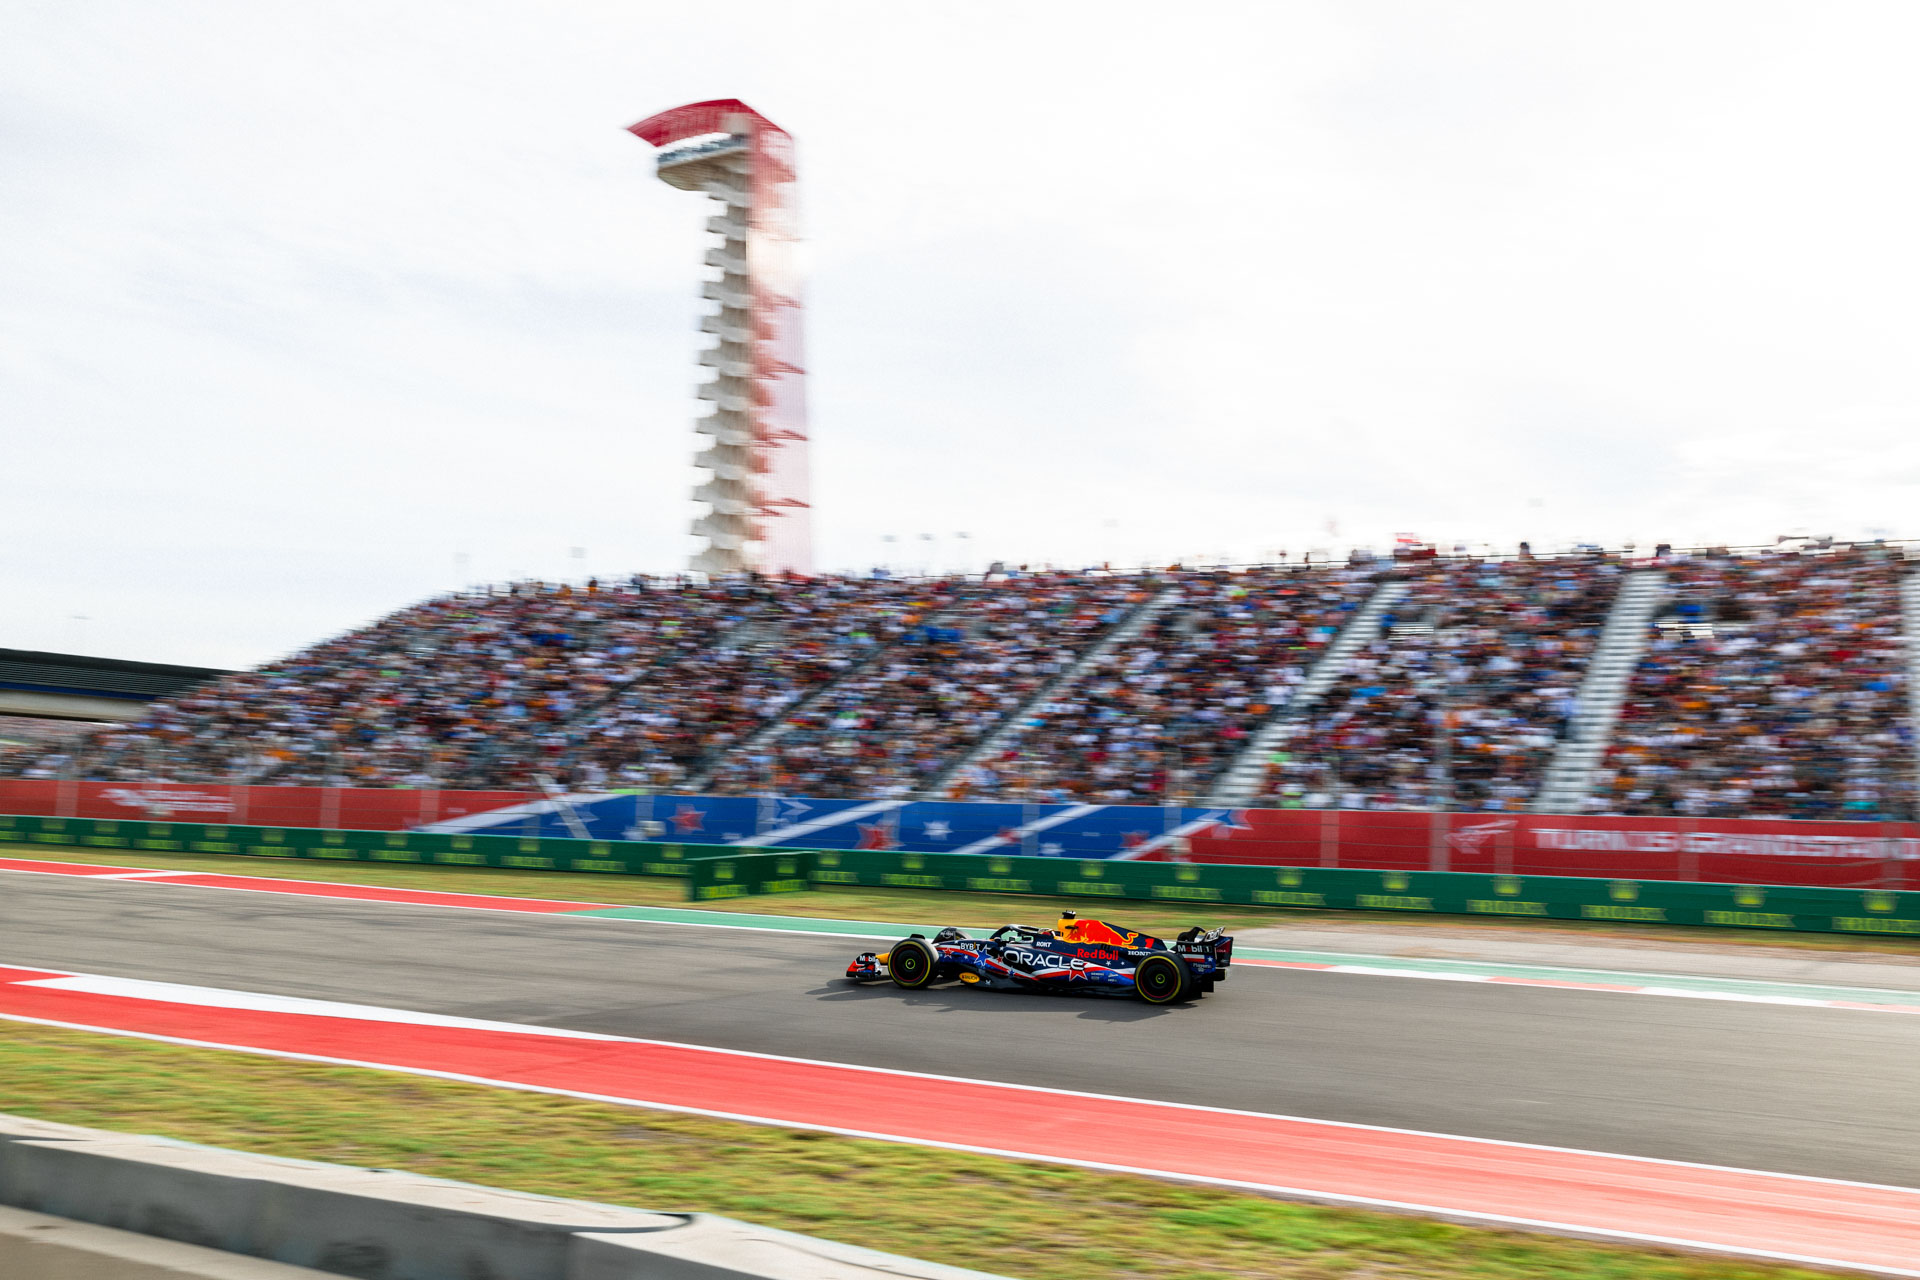 Official Red Bull Grand Prix of the Americas Merchandise Available Now From  the Cota Store - Home of the World Championships